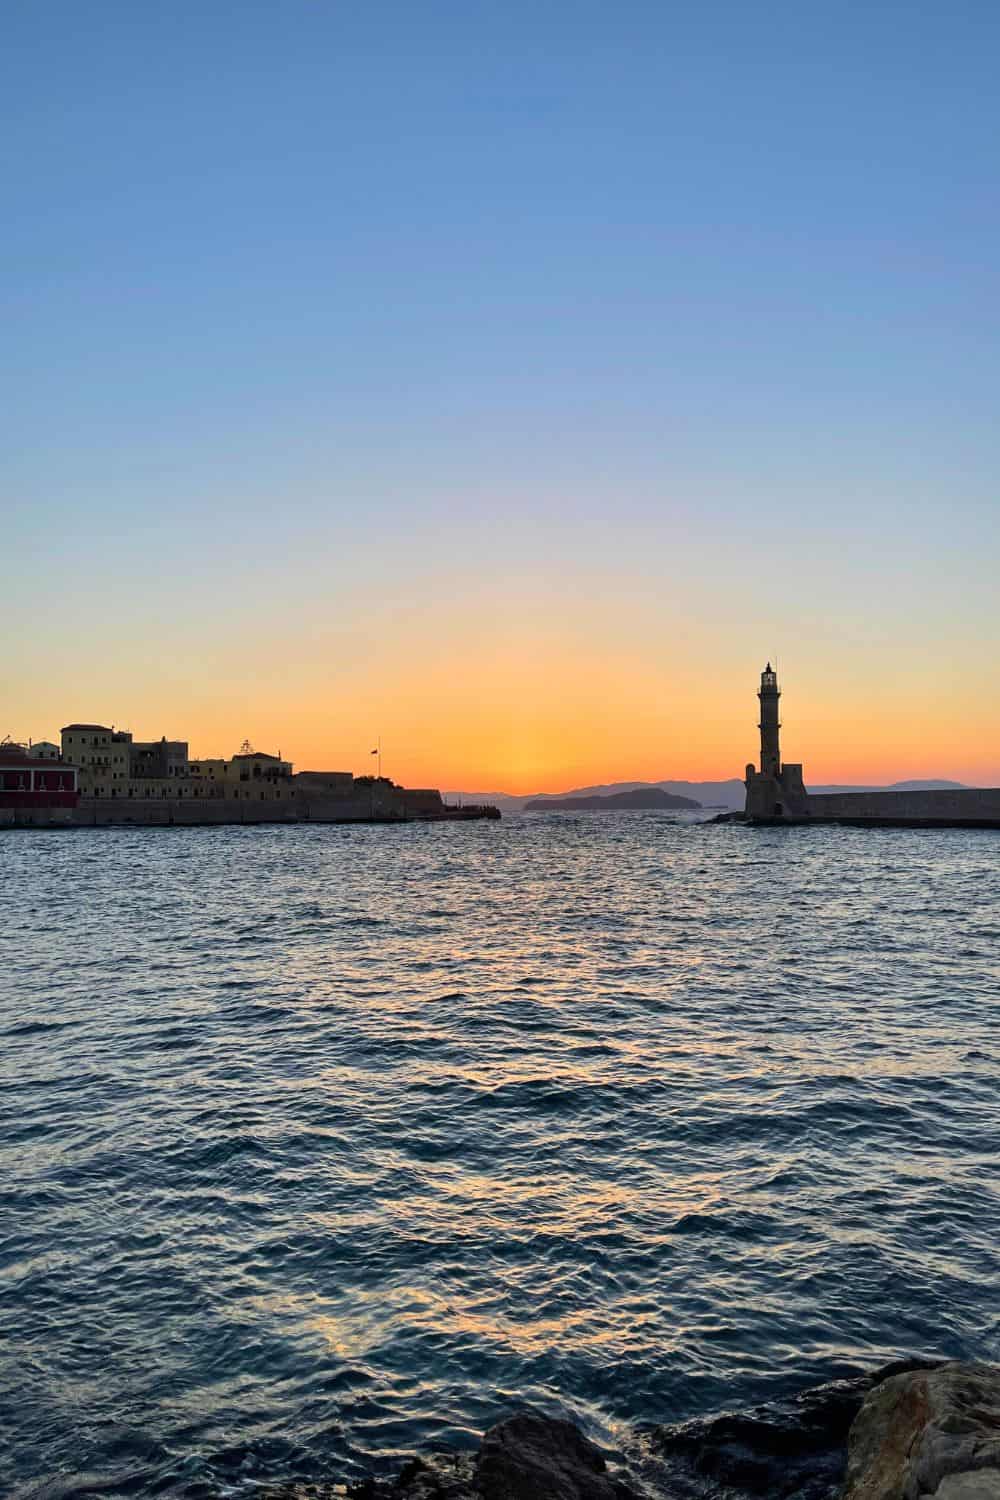 Lighthouse in Chania Harbor with sunset skies.